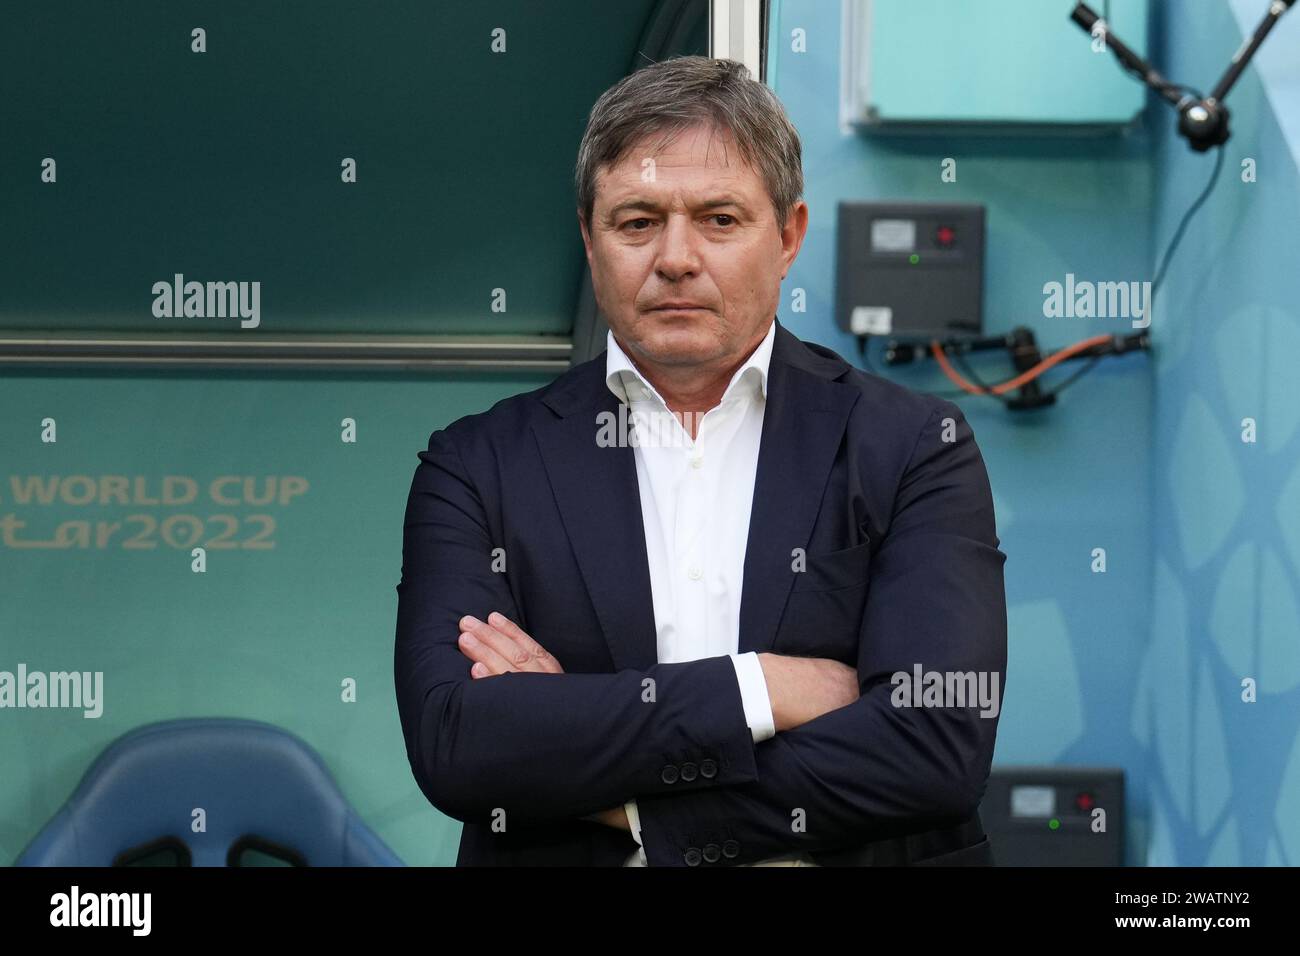 Coach Dragan Stojkovic of Serbia seen during the FIFA World Cup Qatar 2022 match between Cameroon and Serbia at Al Janoub Stadium. Final score: Cameroon 3:3 Serbia. Stock Photo